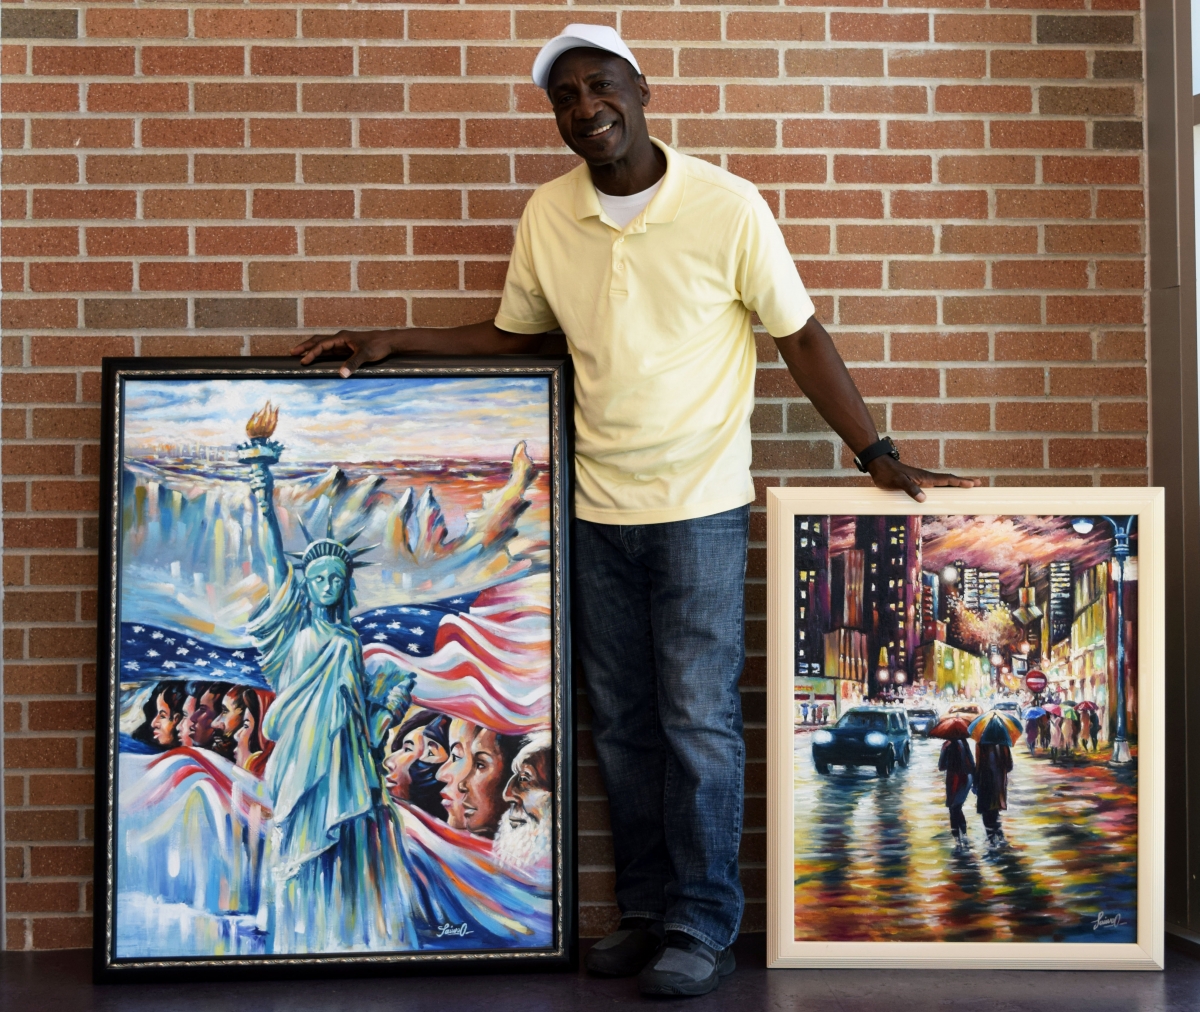 Taiwo Owoniyi poses with two of his original paintings